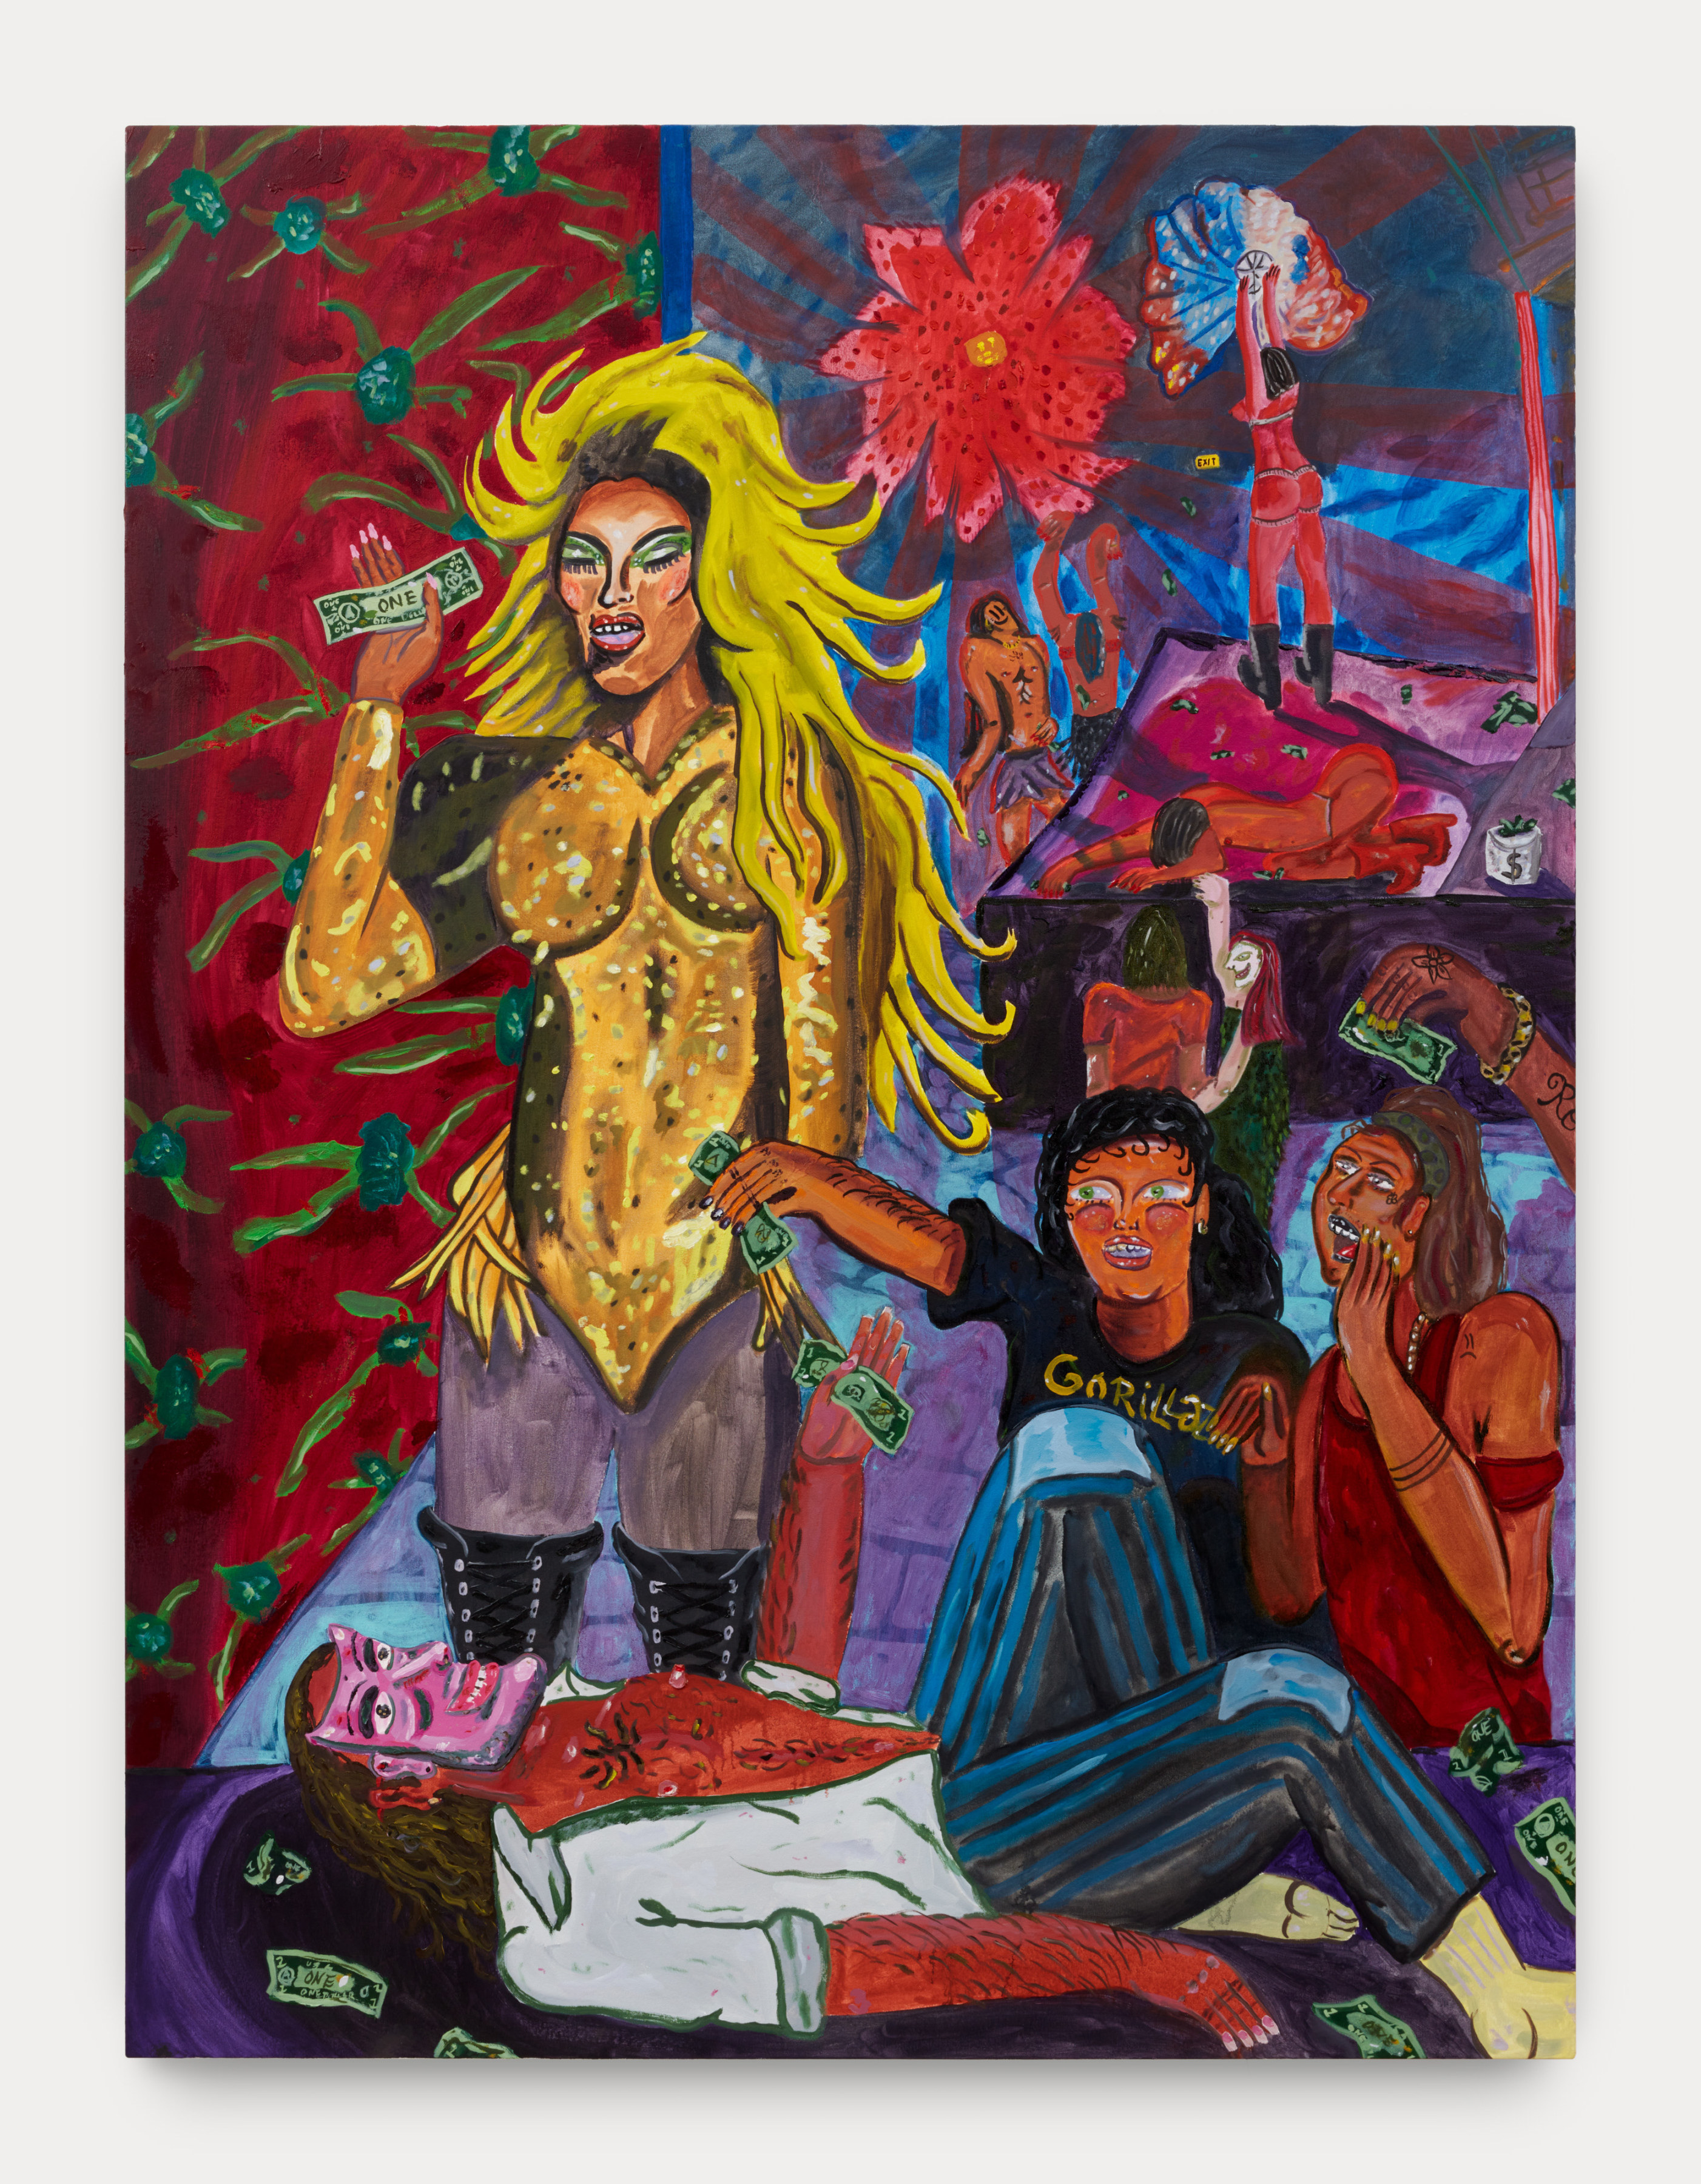 Marcel Alcalá's artwork "Surviving the Performance". A figure lies on the floor wearing a purple mask while onlookers throw one dollar bills. 72 x 54 in (182.9 x 137.2 cm), oil on canvas, 2023